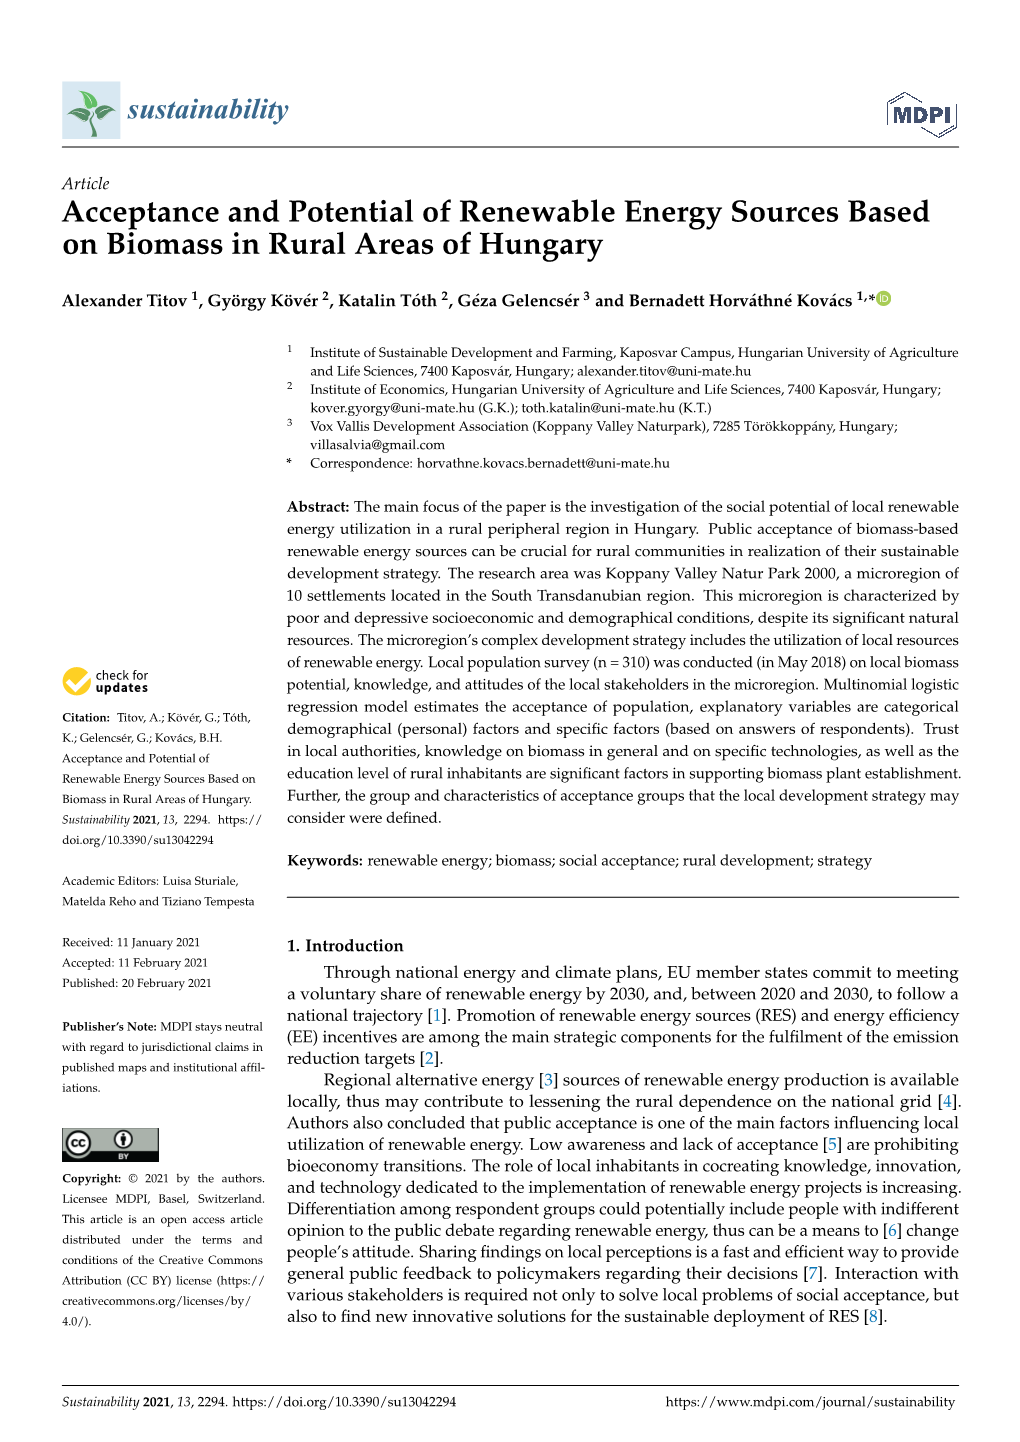 Acceptance and Potential of Renewable Energy Sources Based on Biomass in Rural Areas of Hungary